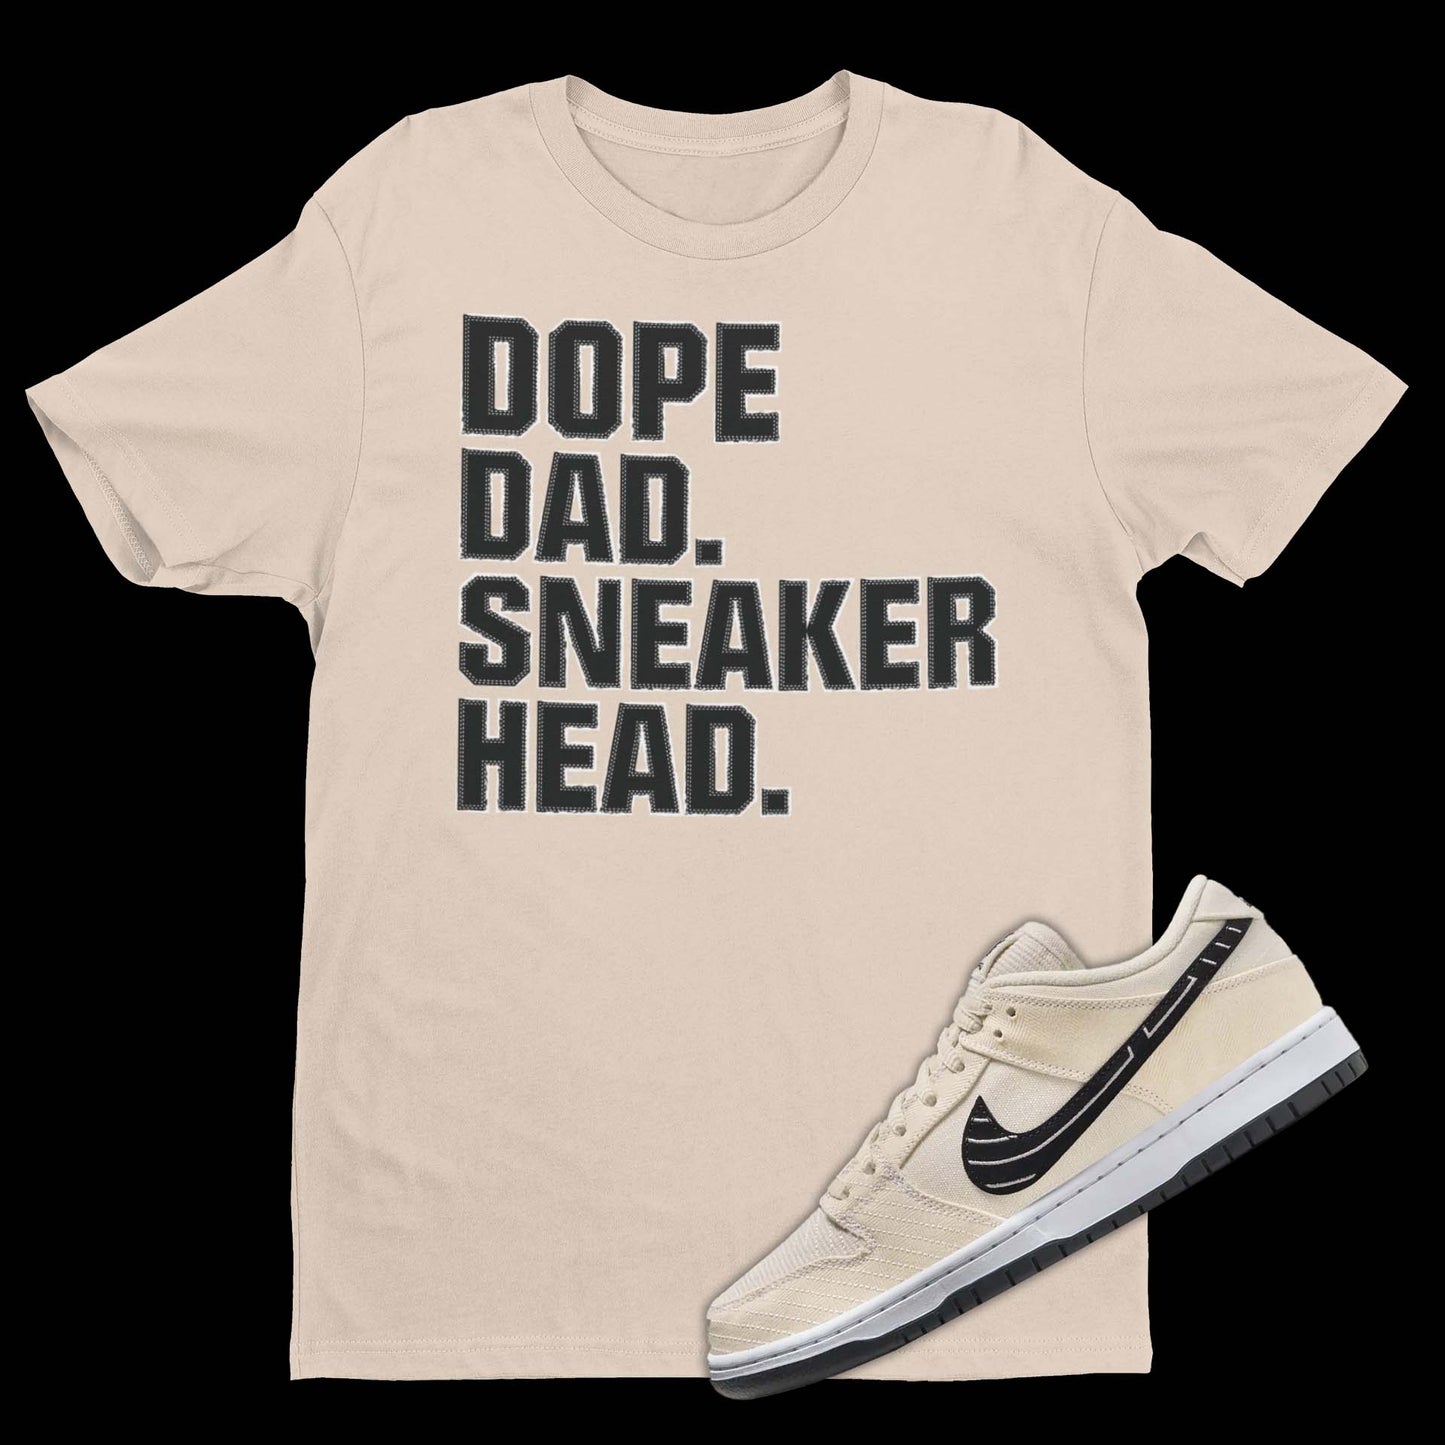 Stay stylish with the Dope Dad Sneakerhead Nike Albino & Preto Matching T-Shirt from SNKADX